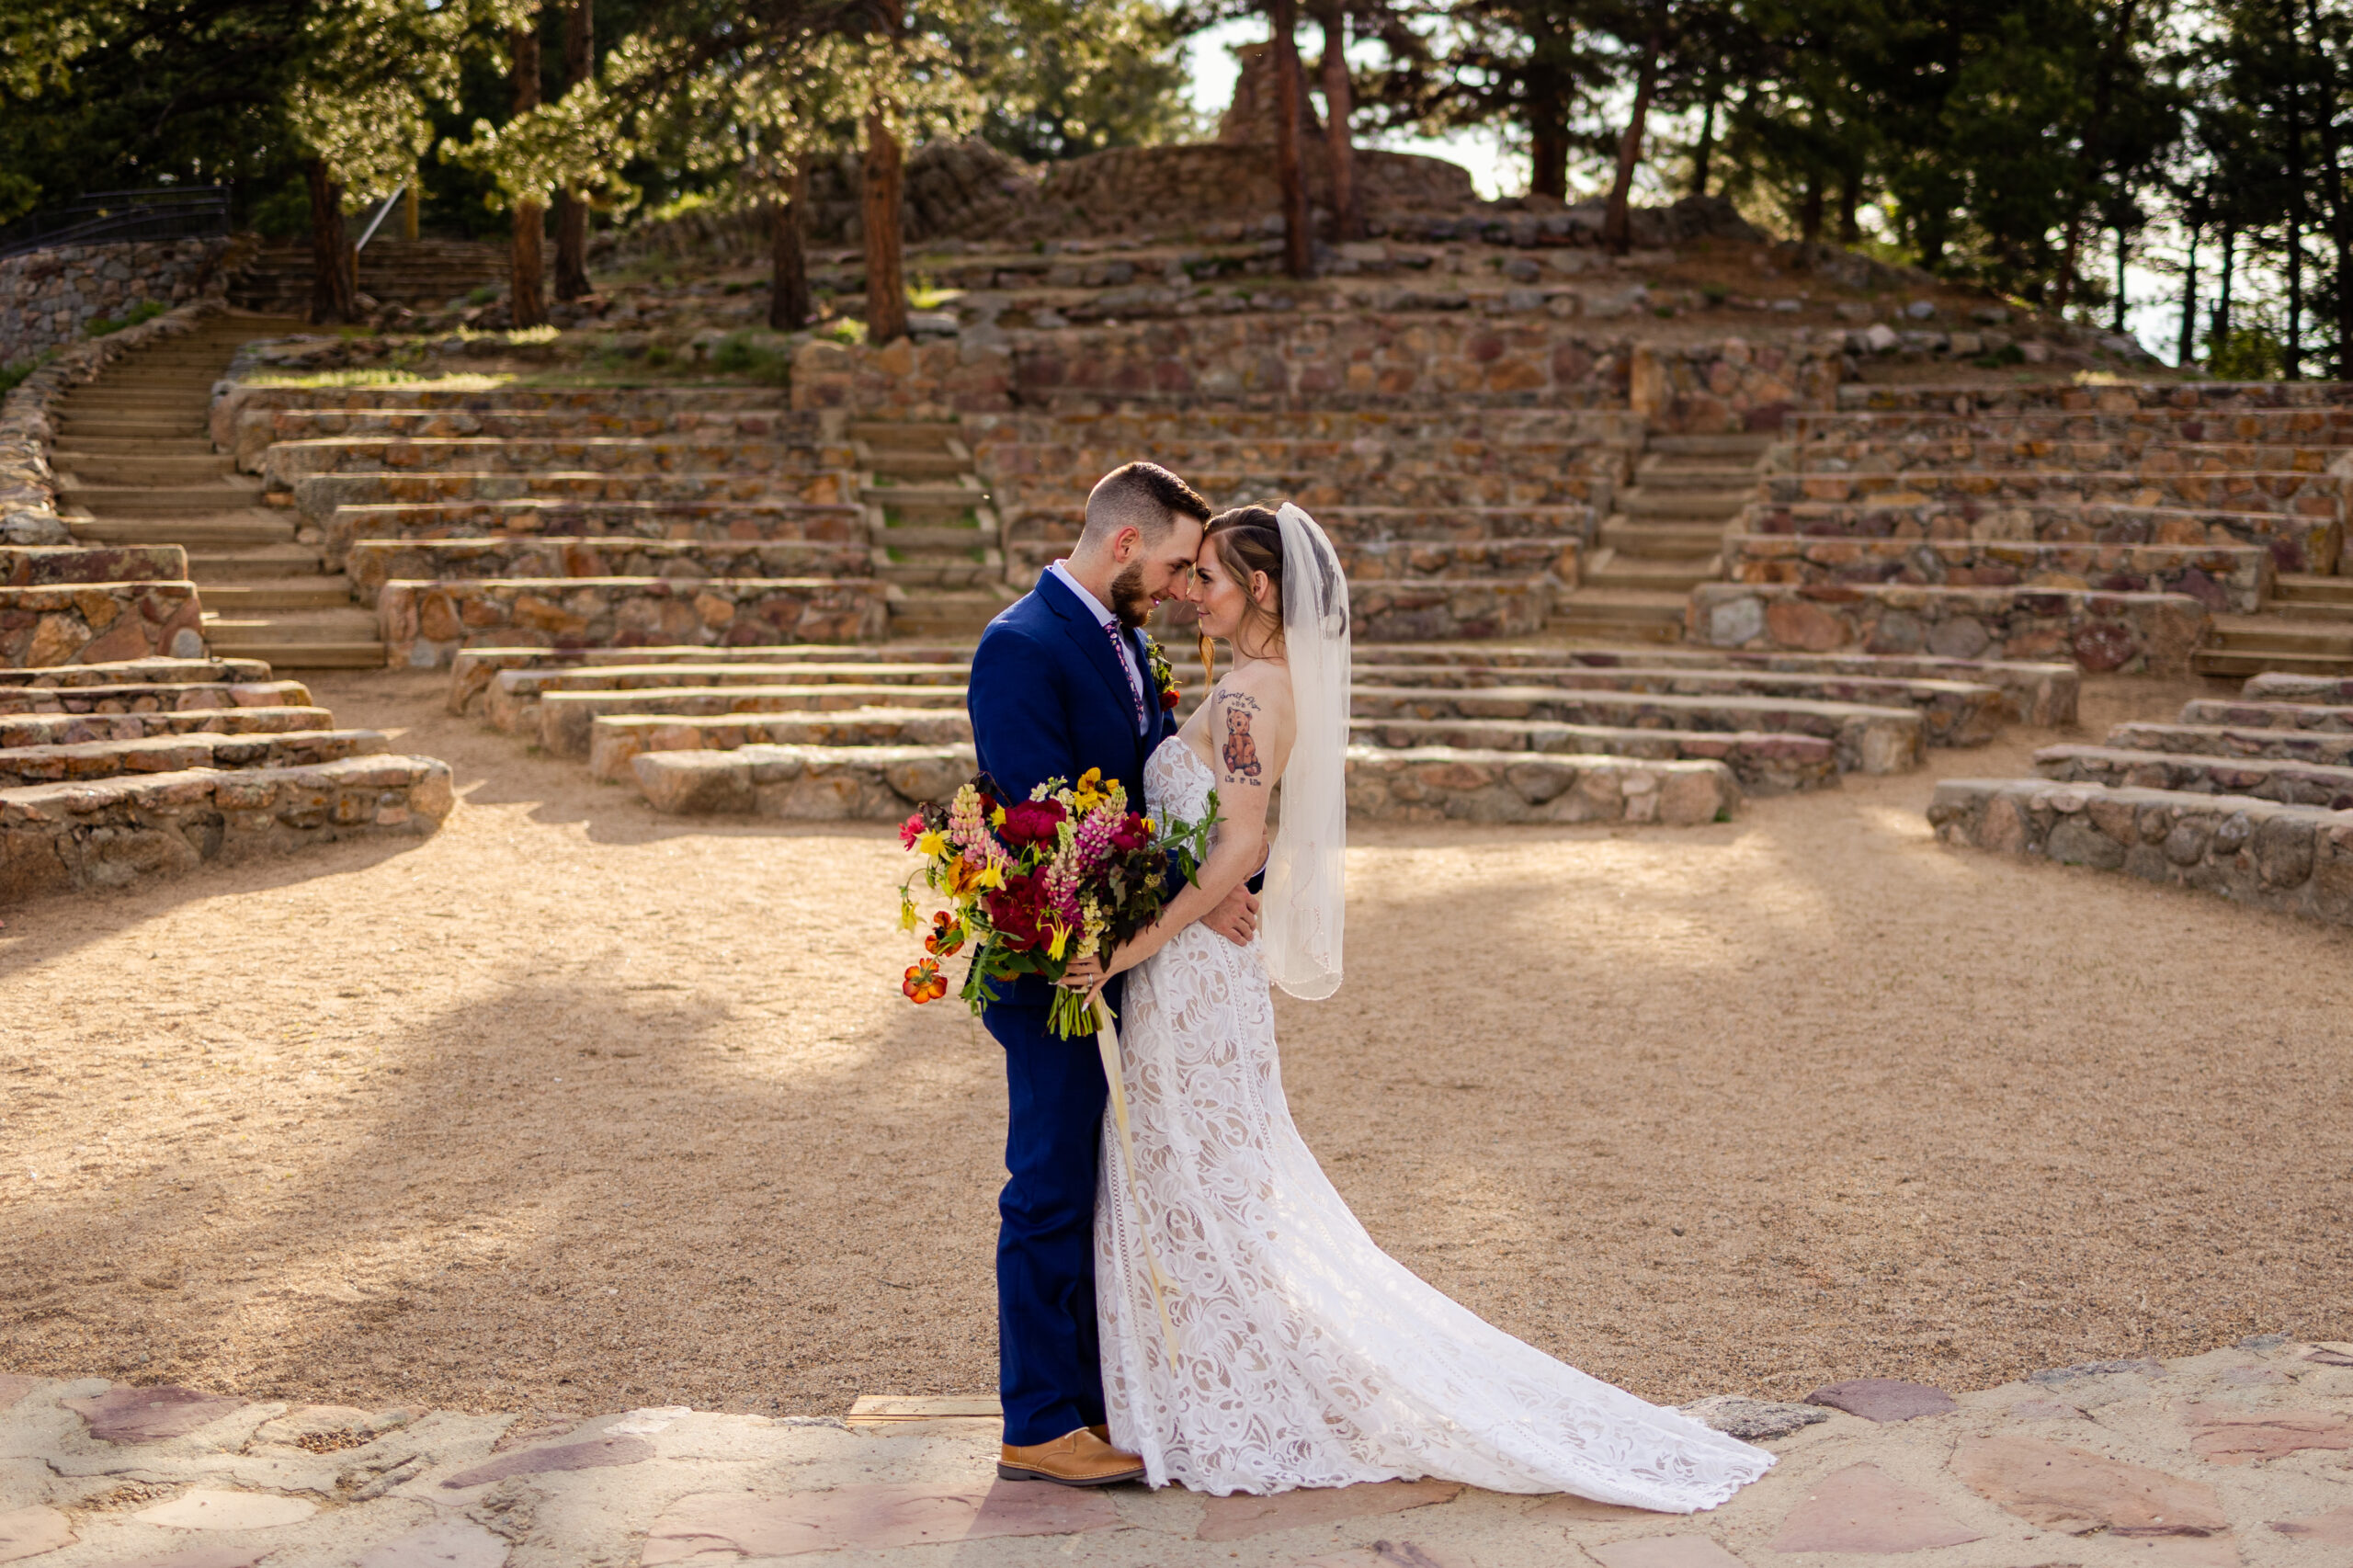 The bride and groom forehead to forehead in the  Sunrise amphitheater on their elopement day.